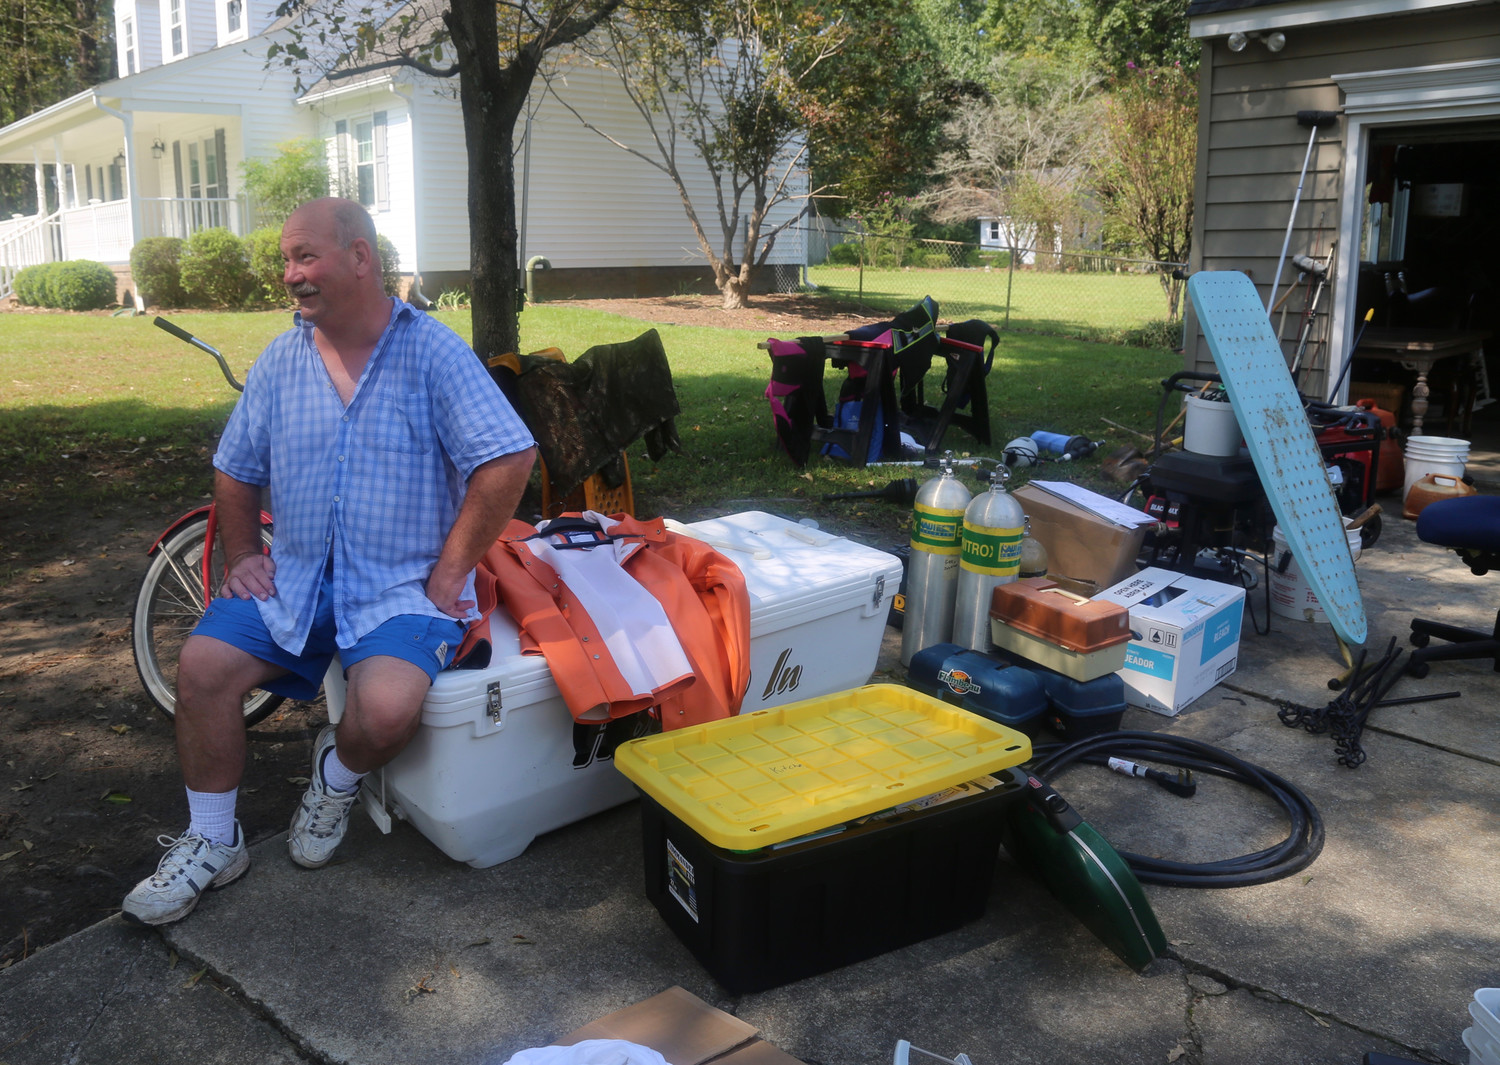 Gary Johnson sits outside his home in Trent Woods, North Carolina, Sept. 22. The house was flooded during Hurricane Florence, and Johnson, his wife, Megan, and their two daughters are unable to live in it.